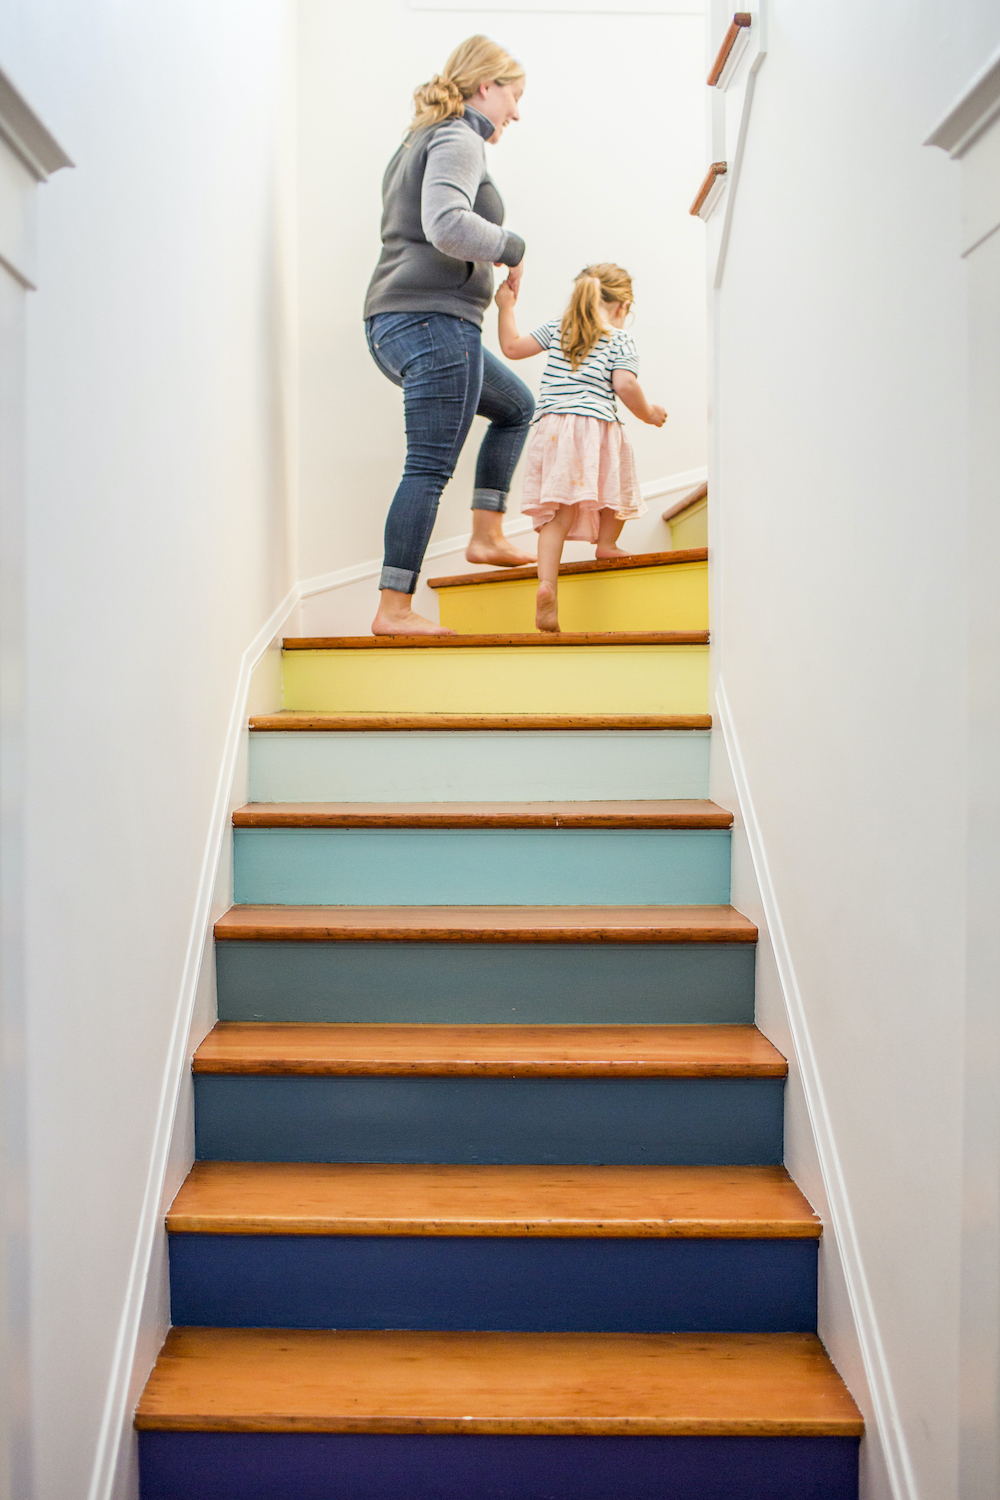 Mother and daughter holding hands climbing a multicolour wooden staircase painted with blue, green and yellow paints of various shades